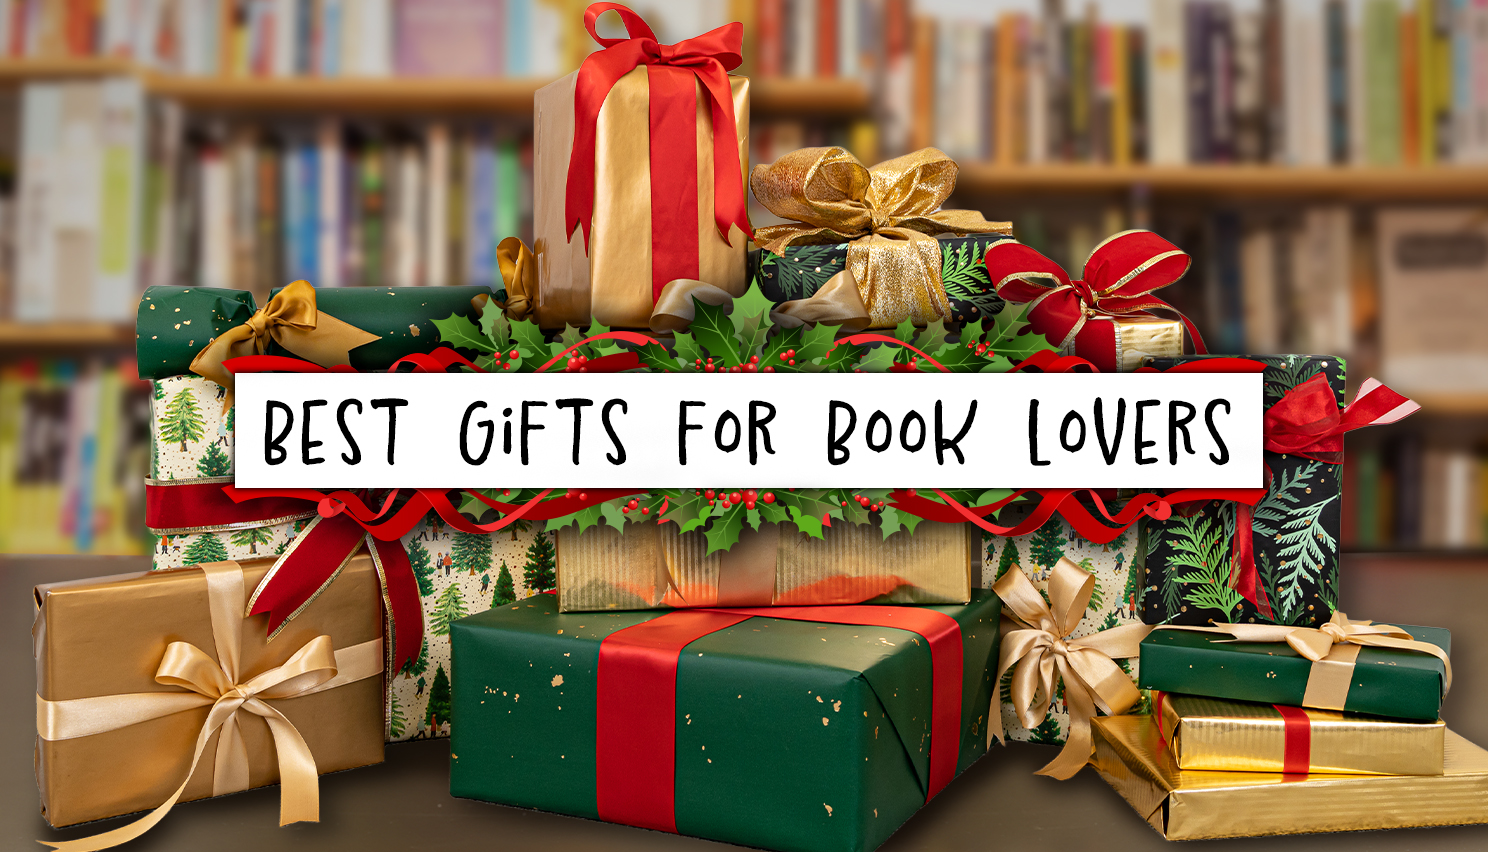 Half Price Books $500 Gift Card Sweepstakes